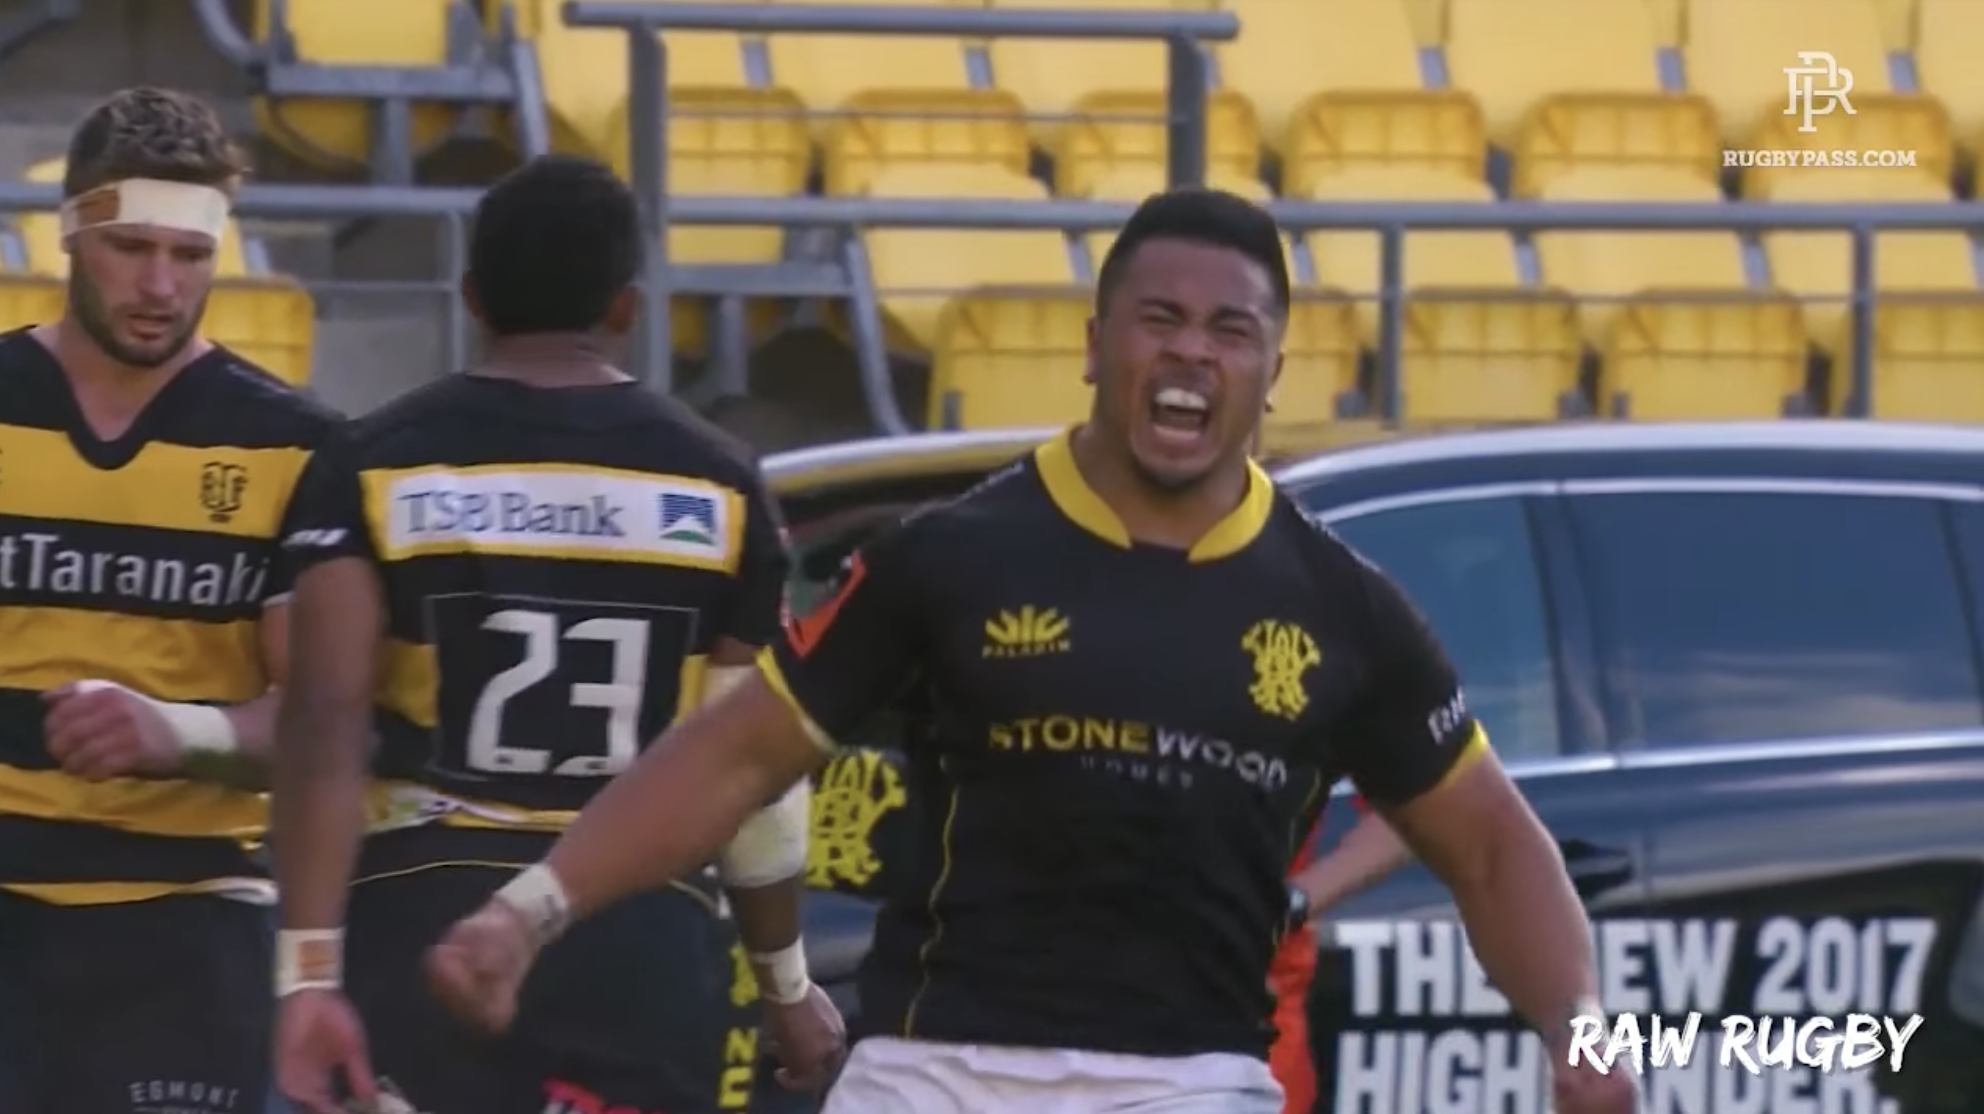 VIDEO: A new highlights reel has been made on possibly the most exciting prospect in New Zealand rugby